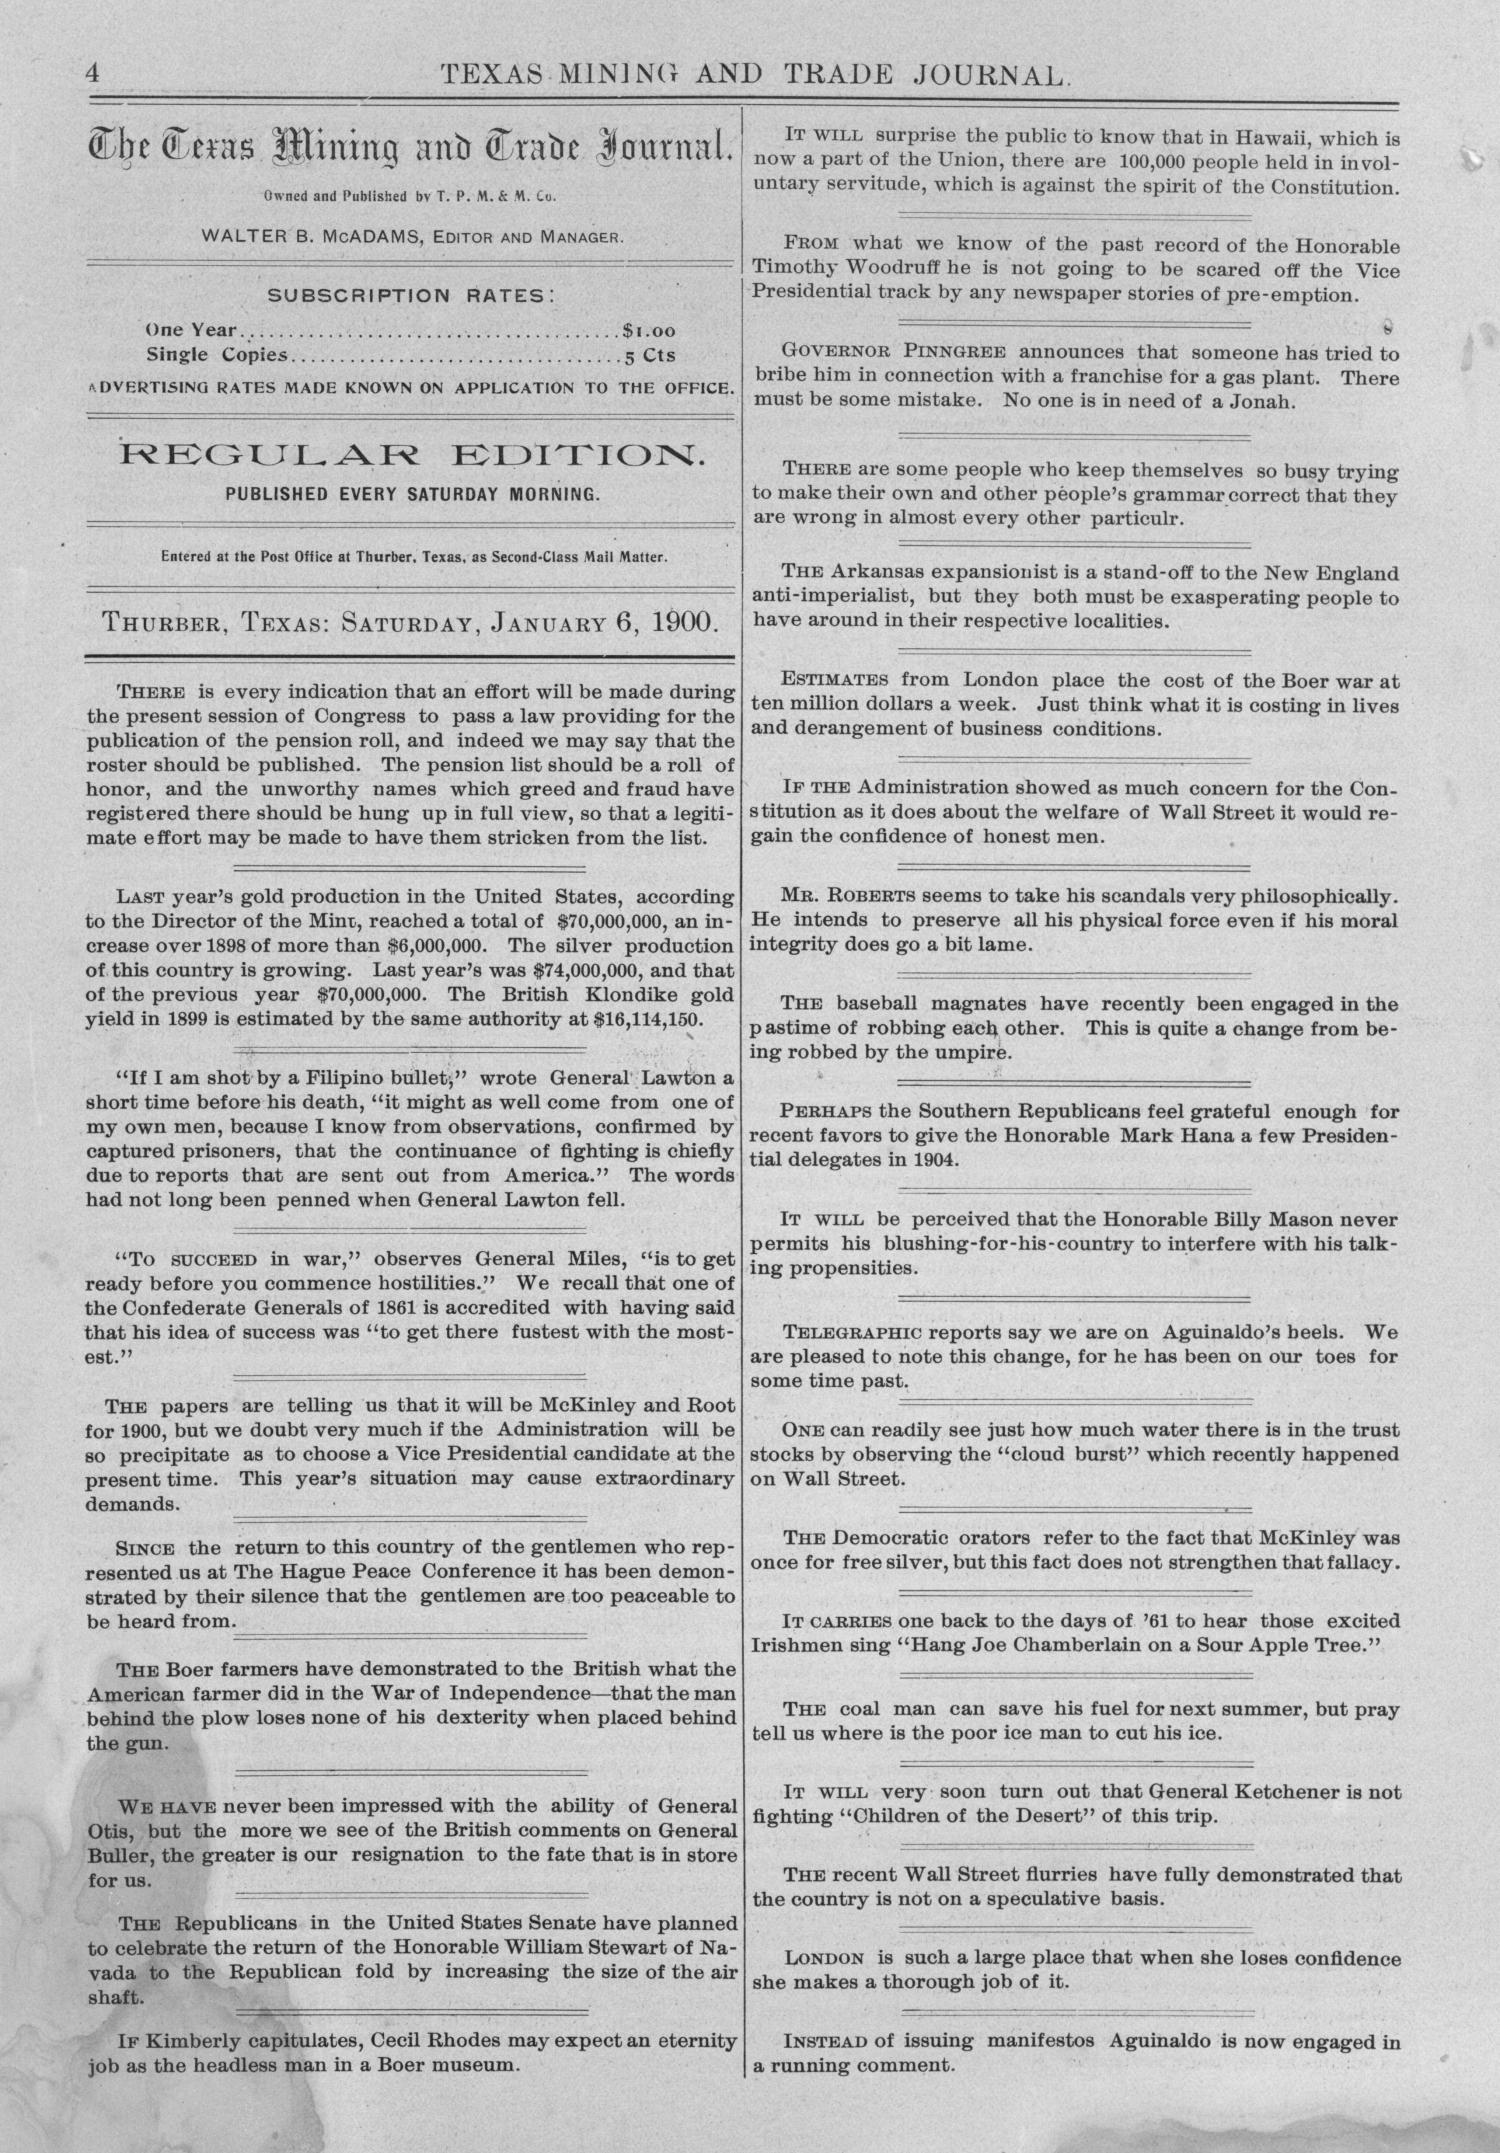 Texas Mining and Trade Journal, Volume 4, Number 25, Saturday, January 6, 1900
                                                
                                                    4
                                                